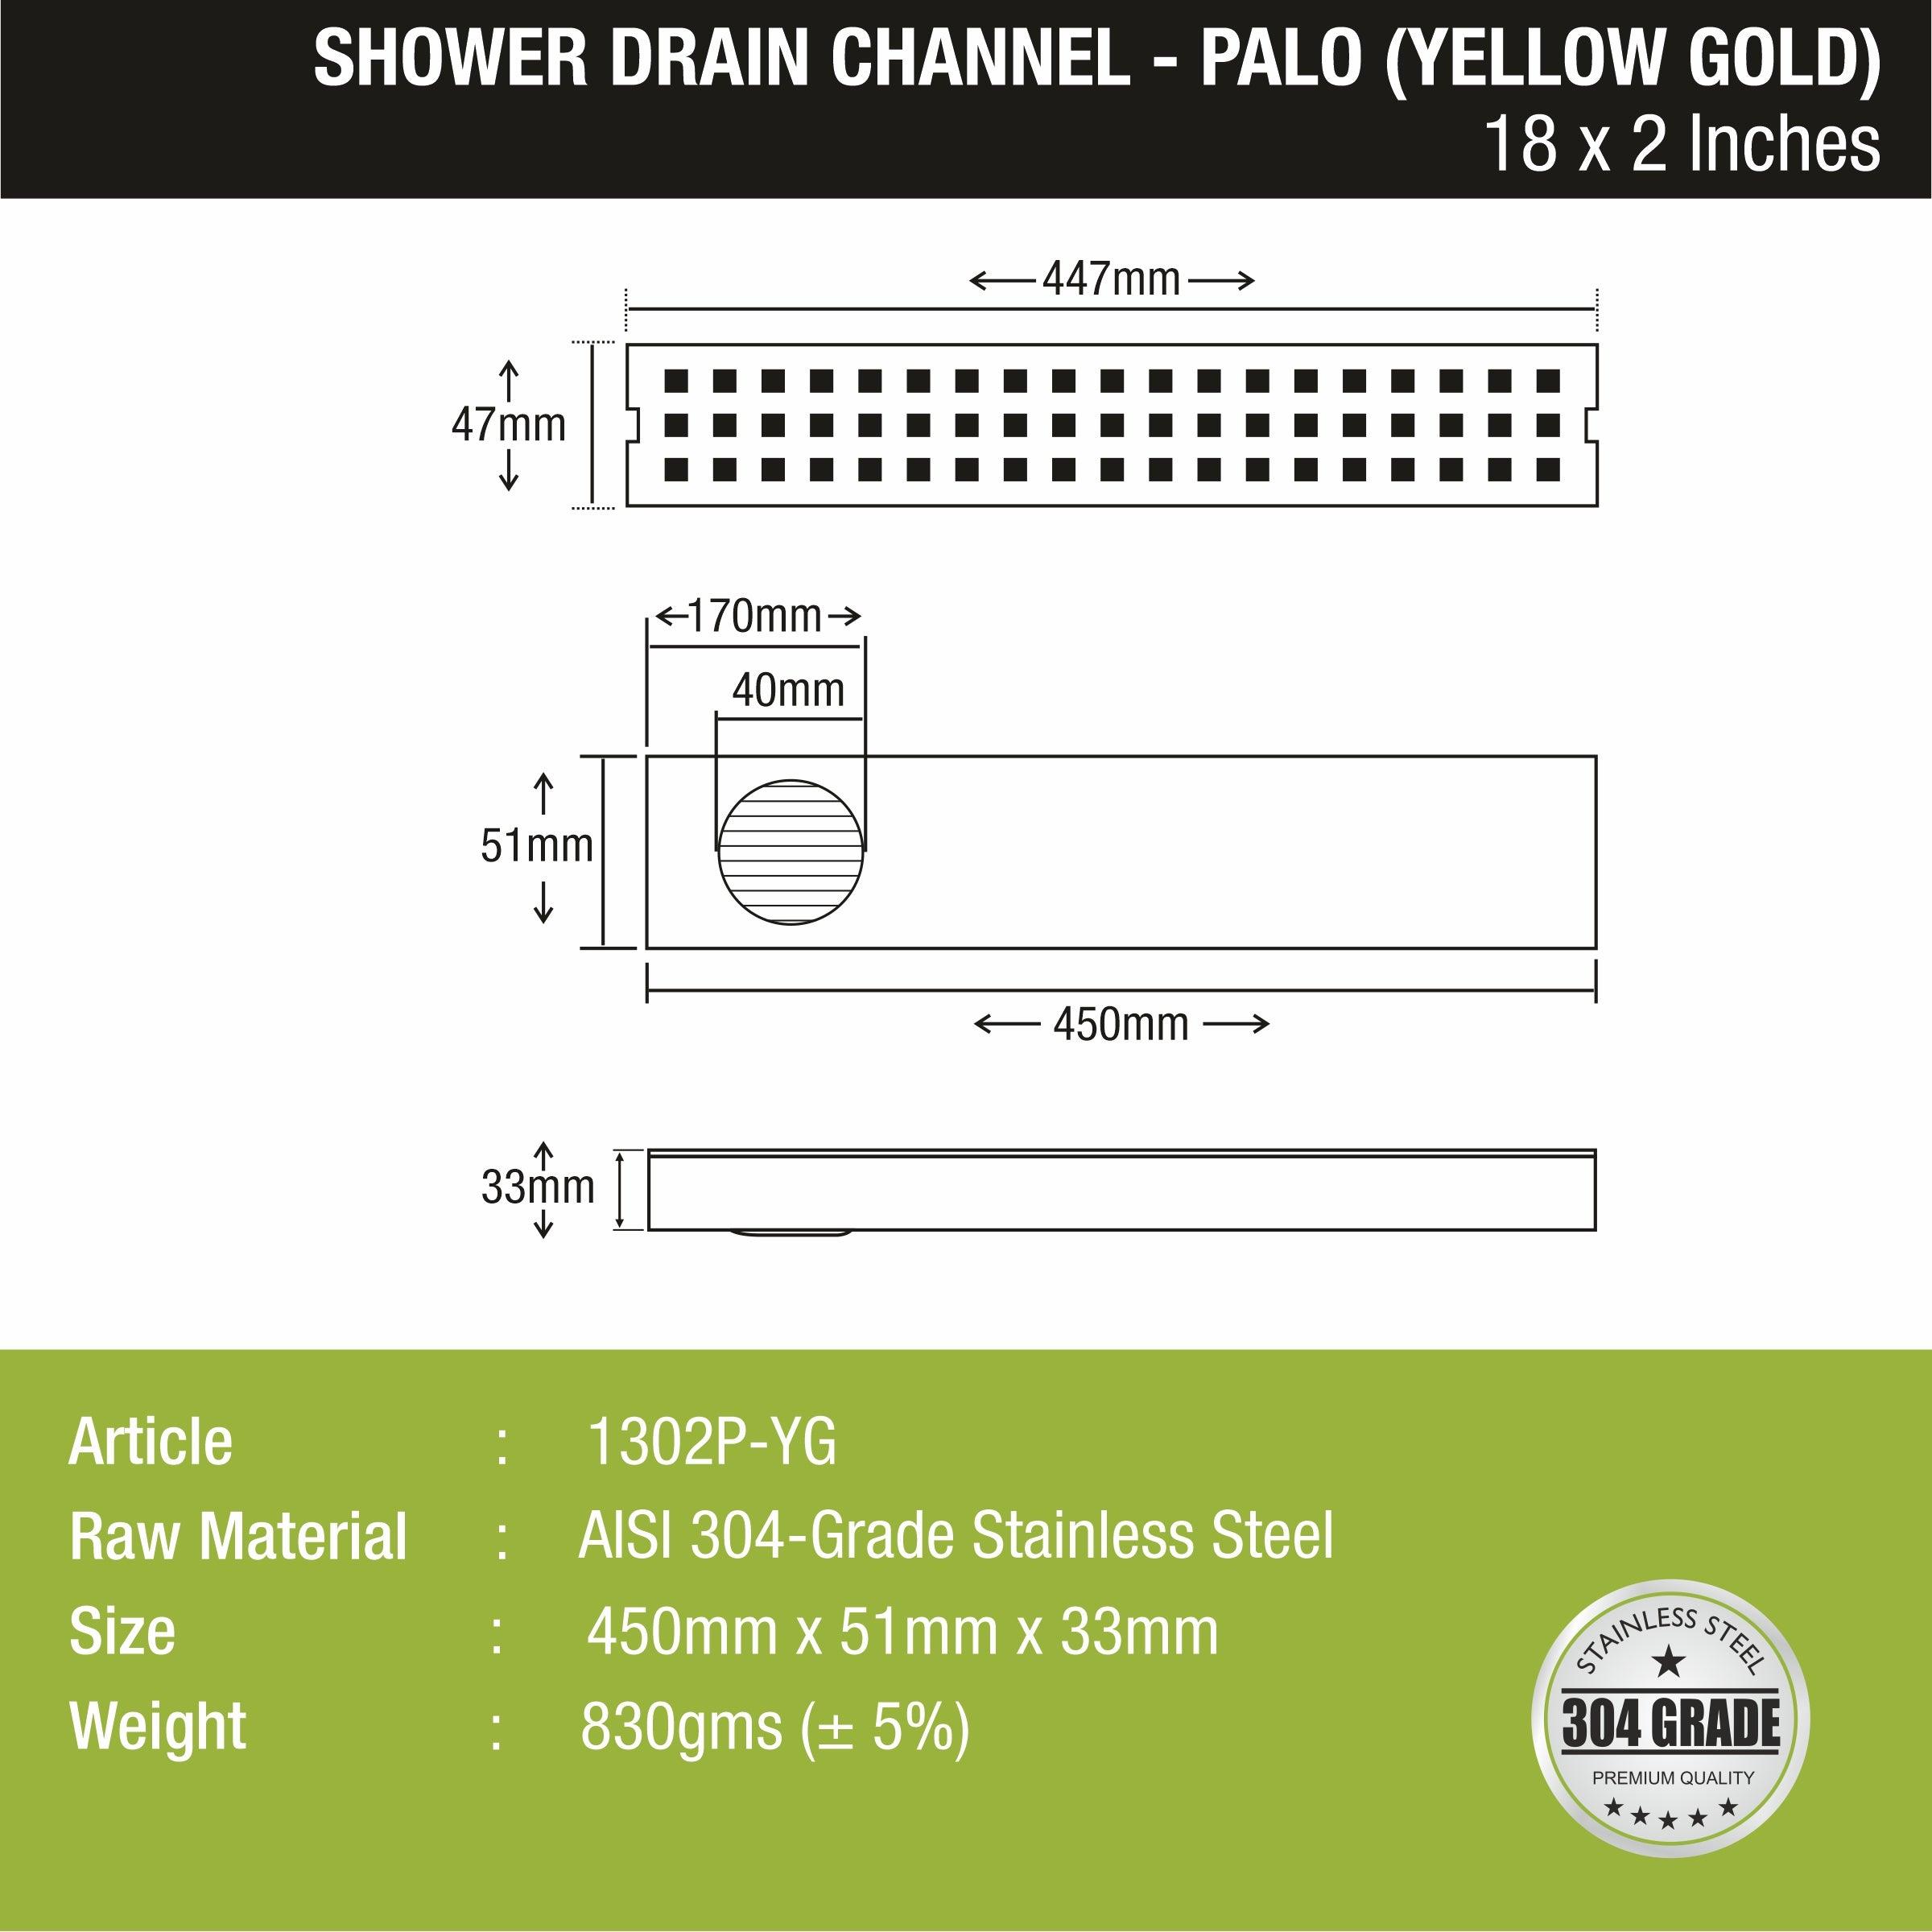 Palo Shower Drain Channel - Yellow Gold (18 x 2 Inches) sizes and dimensions